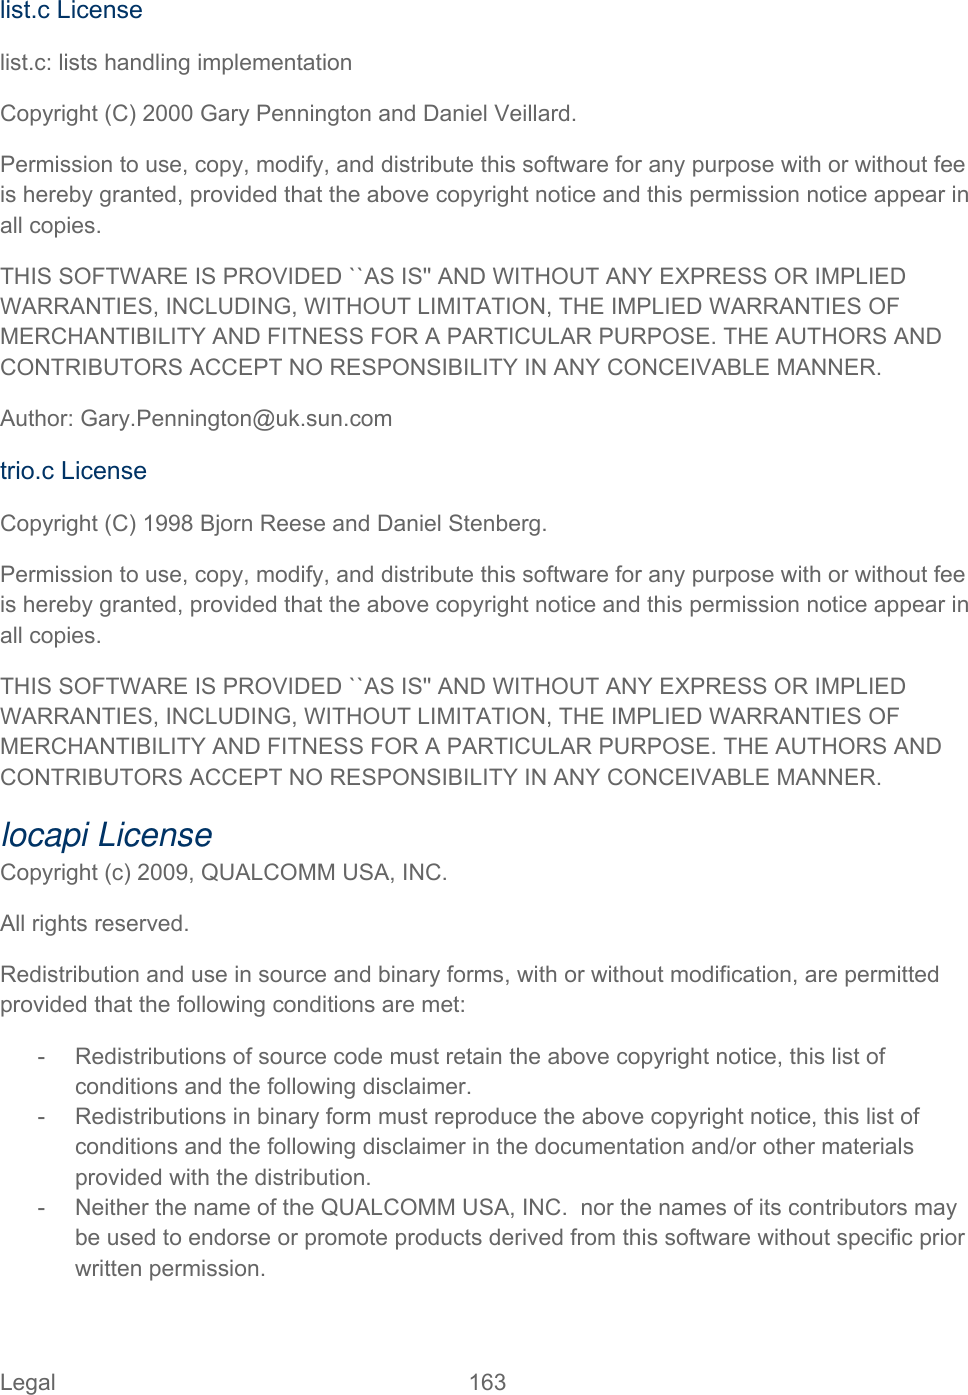 Legal 163   list.c License list.c: lists handling implementation Copyright (C) 2000 Gary Pennington and Daniel Veillard. Permission to use, copy, modify, and distribute this software for any purpose with or without fee is hereby granted, provided that the above copyright notice and this permission notice appear in all copies. THIS SOFTWARE IS PROVIDED ``AS IS&apos;&apos; AND WITHOUT ANY EXPRESS OR IMPLIED WARRANTIES, INCLUDING, WITHOUT LIMITATION, THE IMPLIED WARRANTIES OF MERCHANTIBILITY AND FITNESS FOR A PARTICULAR PURPOSE. THE AUTHORS AND CONTRIBUTORS ACCEPT NO RESPONSIBILITY IN ANY CONCEIVABLE MANNER. Author: Gary.Pennington@uk.sun.com trio.c License Copyright (C) 1998 Bjorn Reese and Daniel Stenberg. Permission to use, copy, modify, and distribute this software for any purpose with or without fee is hereby granted, provided that the above copyright notice and this permission notice appear in all copies. THIS SOFTWARE IS PROVIDED ``AS IS&apos;&apos; AND WITHOUT ANY EXPRESS OR IMPLIED WARRANTIES, INCLUDING, WITHOUT LIMITATION, THE IMPLIED WARRANTIES OF MERCHANTIBILITY AND FITNESS FOR A PARTICULAR PURPOSE. THE AUTHORS AND CONTRIBUTORS ACCEPT NO RESPONSIBILITY IN ANY CONCEIVABLE MANNER. locapi License  Copyright (c) 2009, QUALCOMM USA, INC. All rights reserved. Redistribution and use in source and binary forms, with or without modification, are permitted provided that the following conditions are met: -  Redistributions of source code must retain the above copyright notice, this list of conditions and the following disclaimer. -  Redistributions in binary form must reproduce the above copyright notice, this list of conditions and the following disclaimer in the documentation and/or other materials provided with the distribution. -  Neither the name of the QUALCOMM USA, INC.  nor the names of its contributors may be used to endorse or promote products derived from this software without specific prior written permission. 